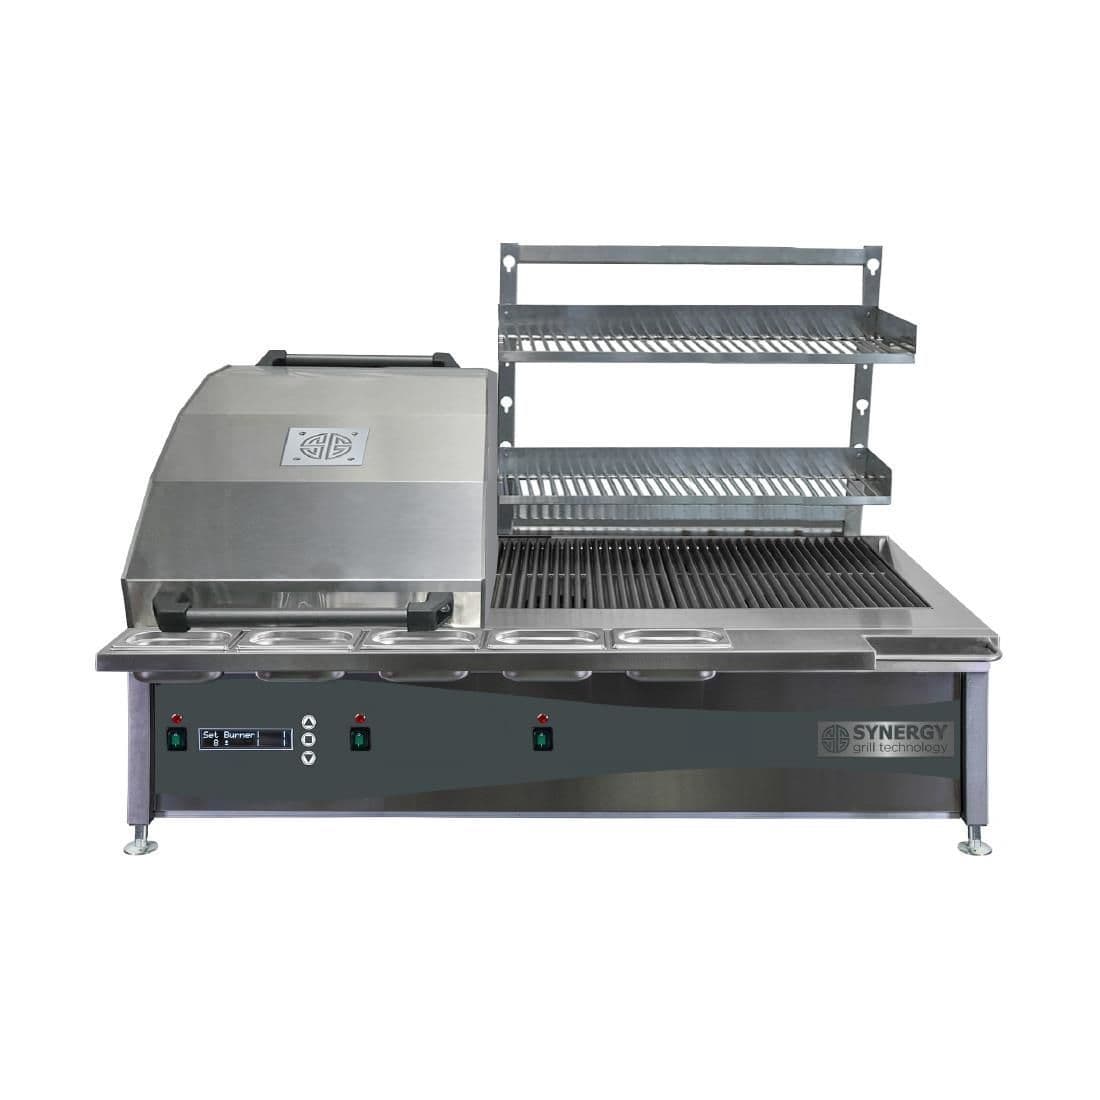 CX882 Synergy Grill Gas Chargrill Oven with Single Lid CGO1300DUAL JD Catering Equipment Solutions Ltd